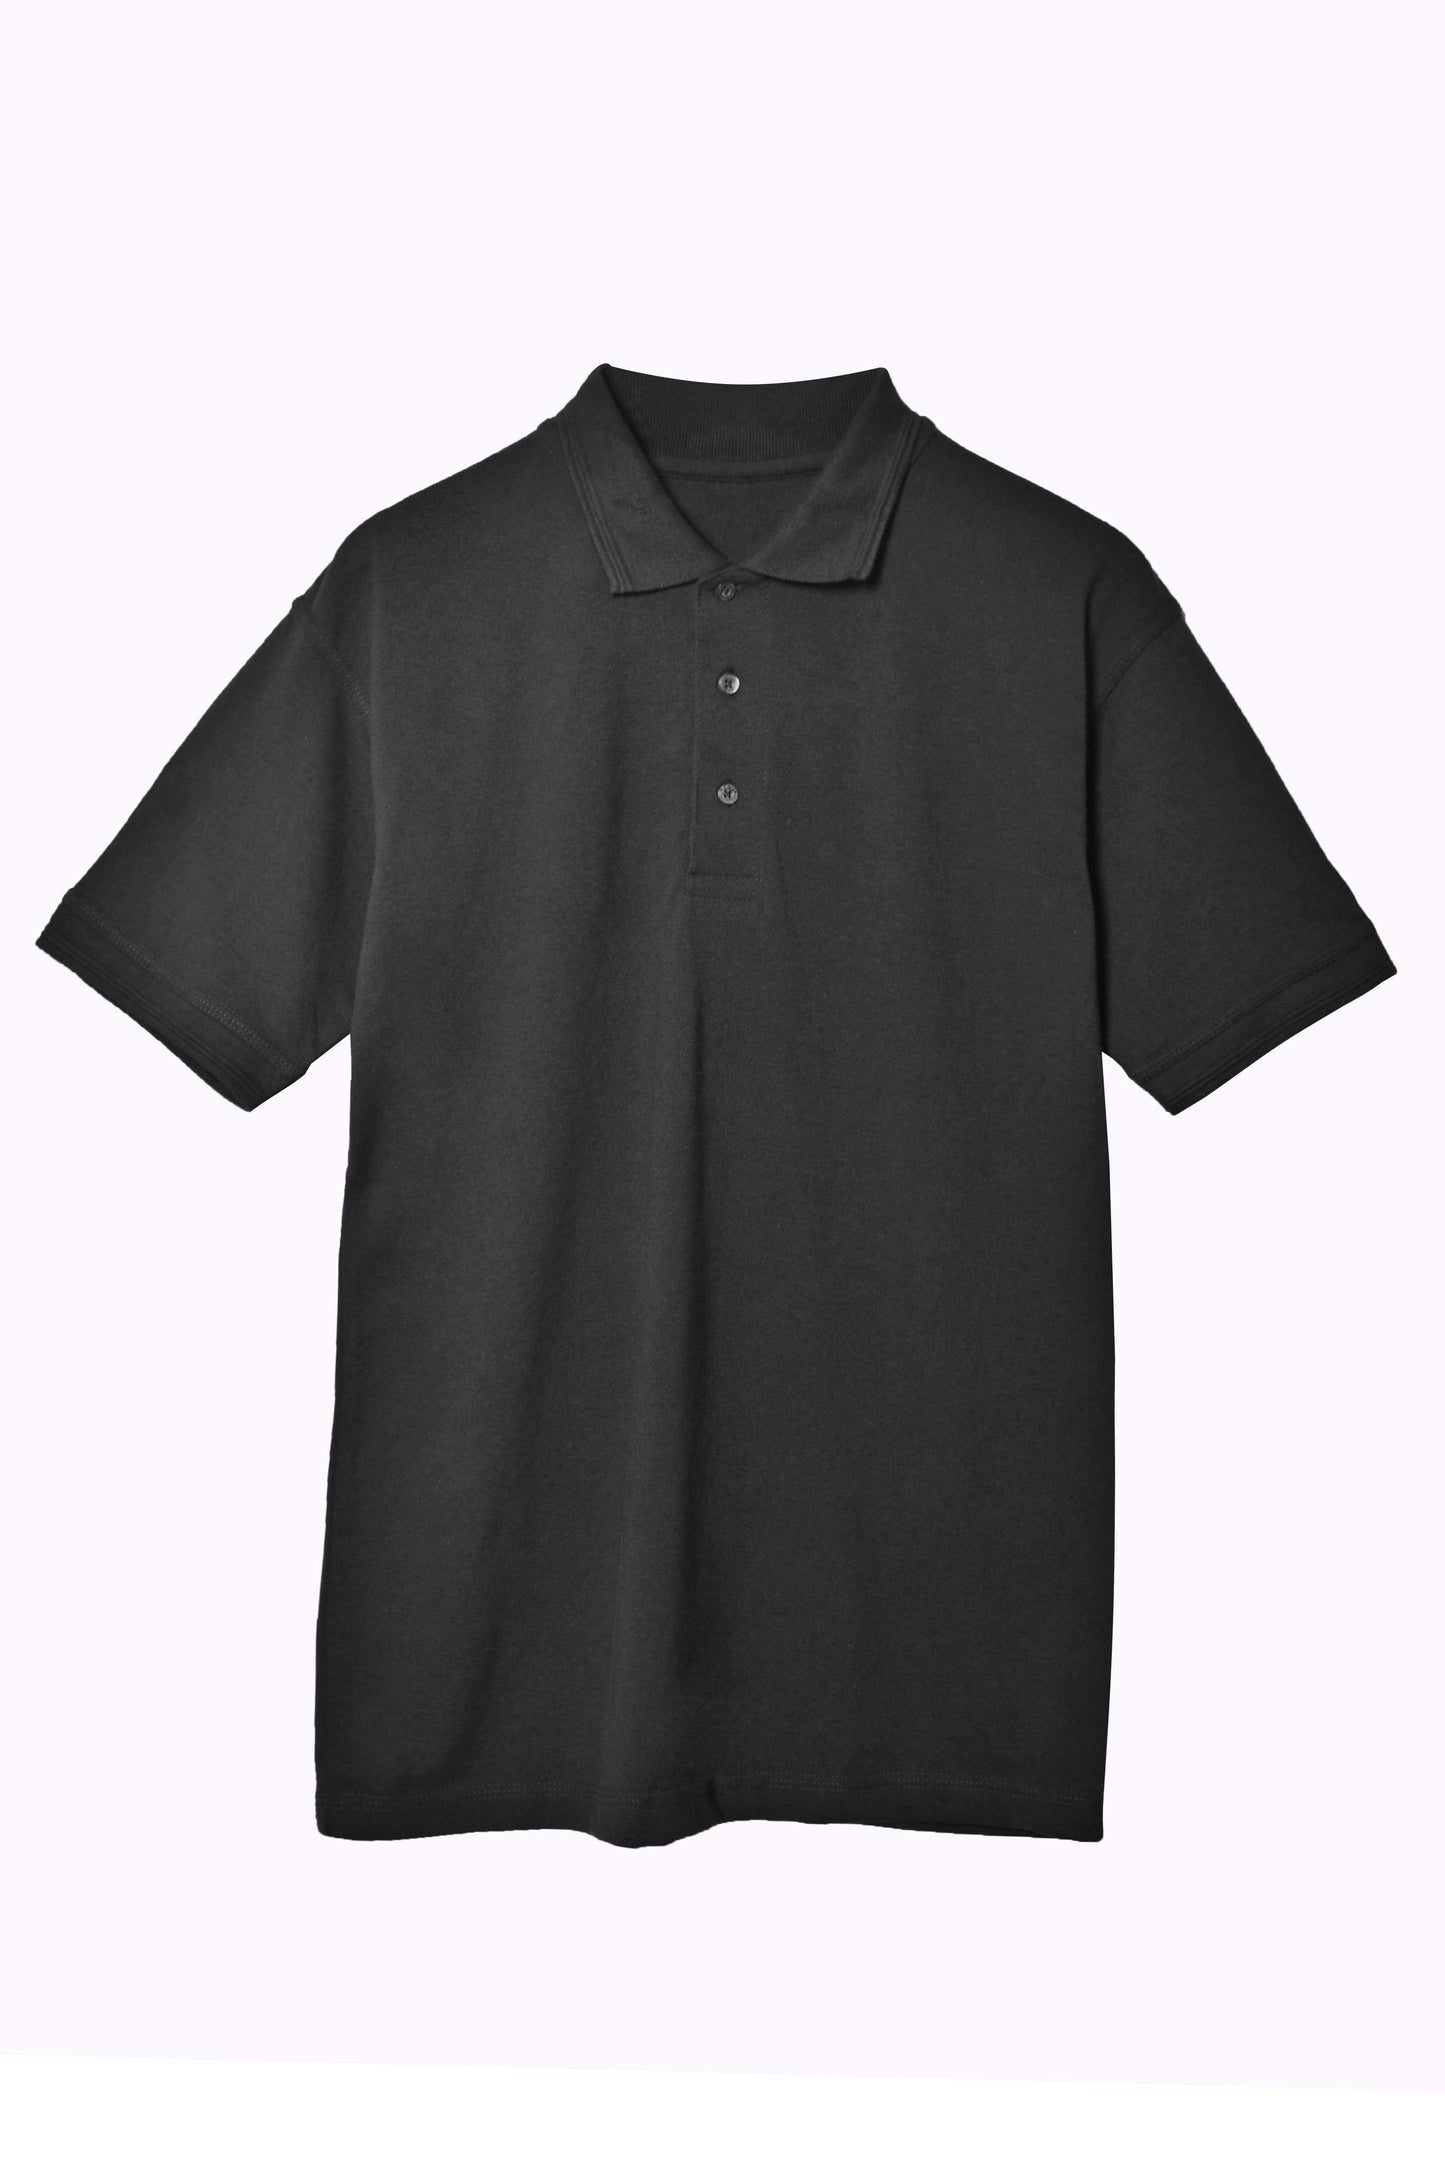 Platic Men's Short Sleeve with Minor Fault Polo Shirt Minor Fault Image 